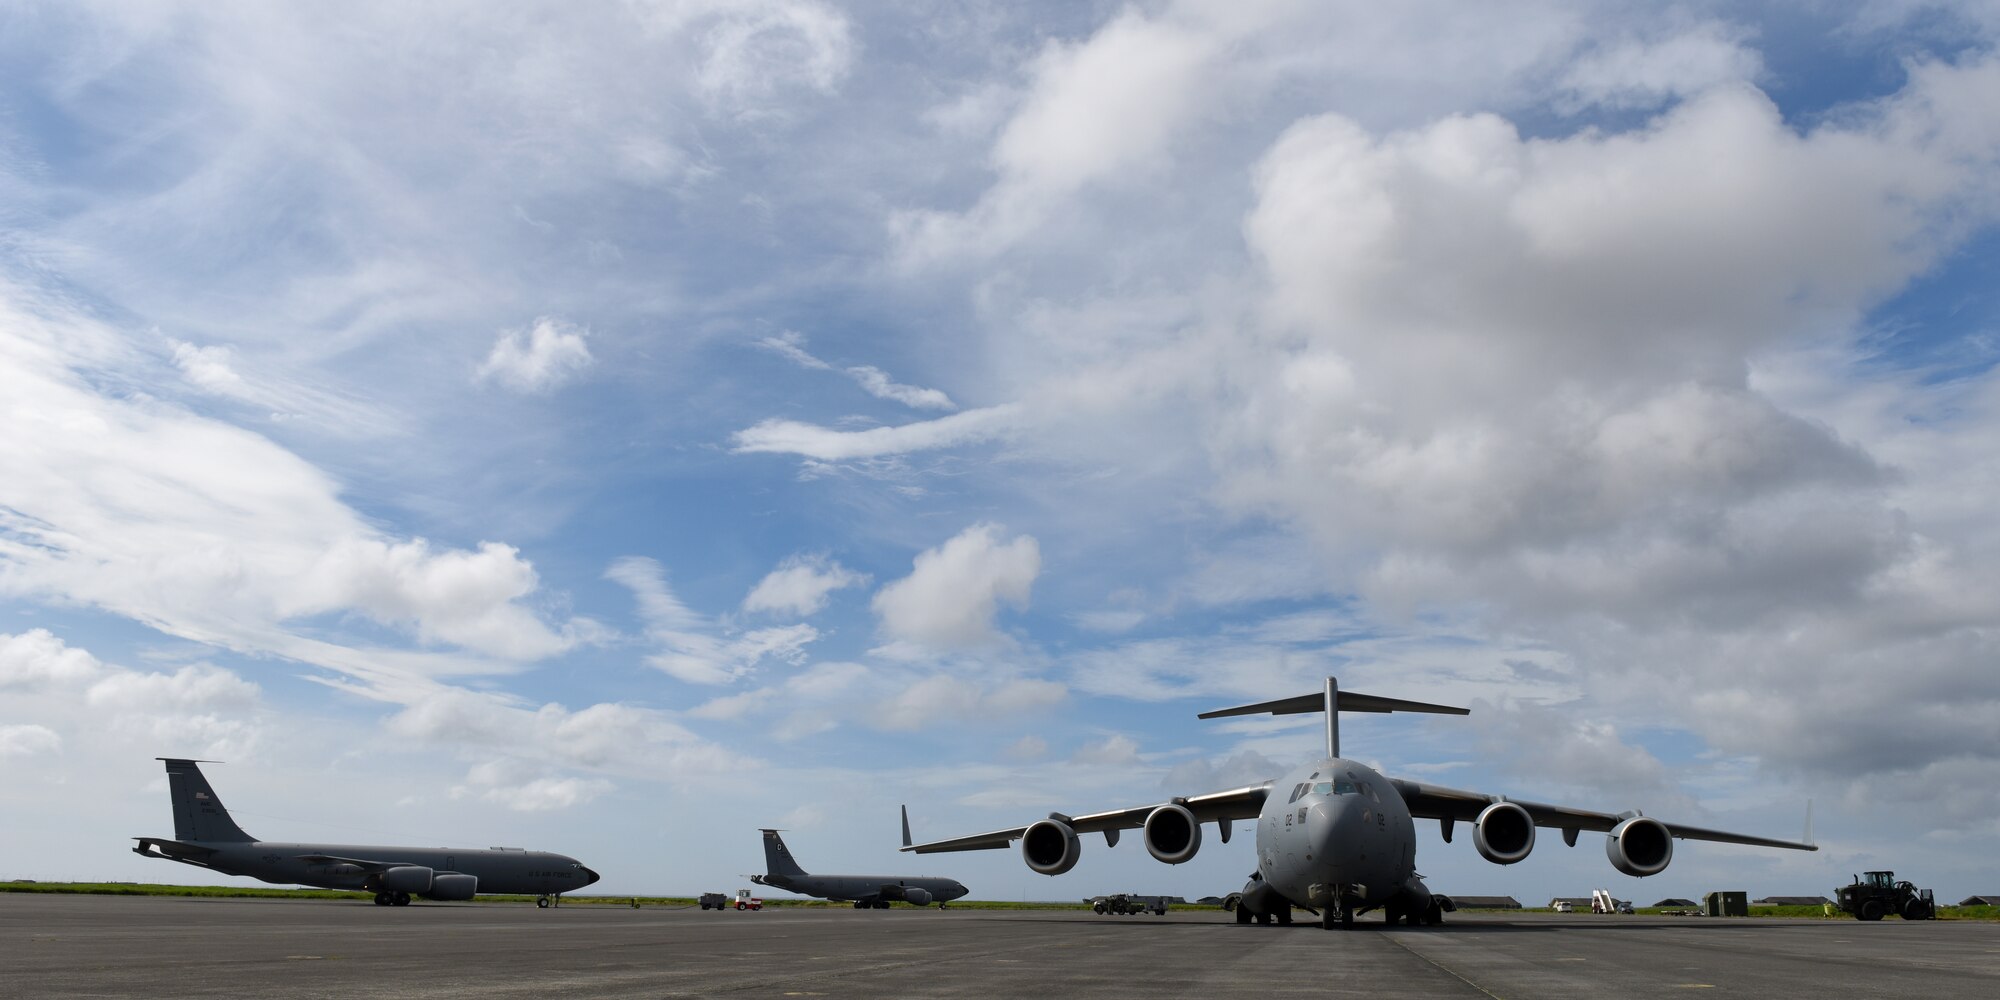 A C-17 Globemaster III from the Heavy Airlift Wing, Pápa Air Base, Hungary, and two KC-135 Stratotankers from the 100th Air Refueling Wing, Royal Air Force Mildenhall, England, sit on the flightline at Keflavik Air Base, Iceland, July 31, 2018, in support of NATO’s Icelandic Air Surveillance mission. The 493rd Expeditionary Fighter Squadron airlifted in all the equipment needed to operate the full-scale IAS mission from the installation. (U.S. Air Force photo/Staff Sgt. Alex Fox Echols III)